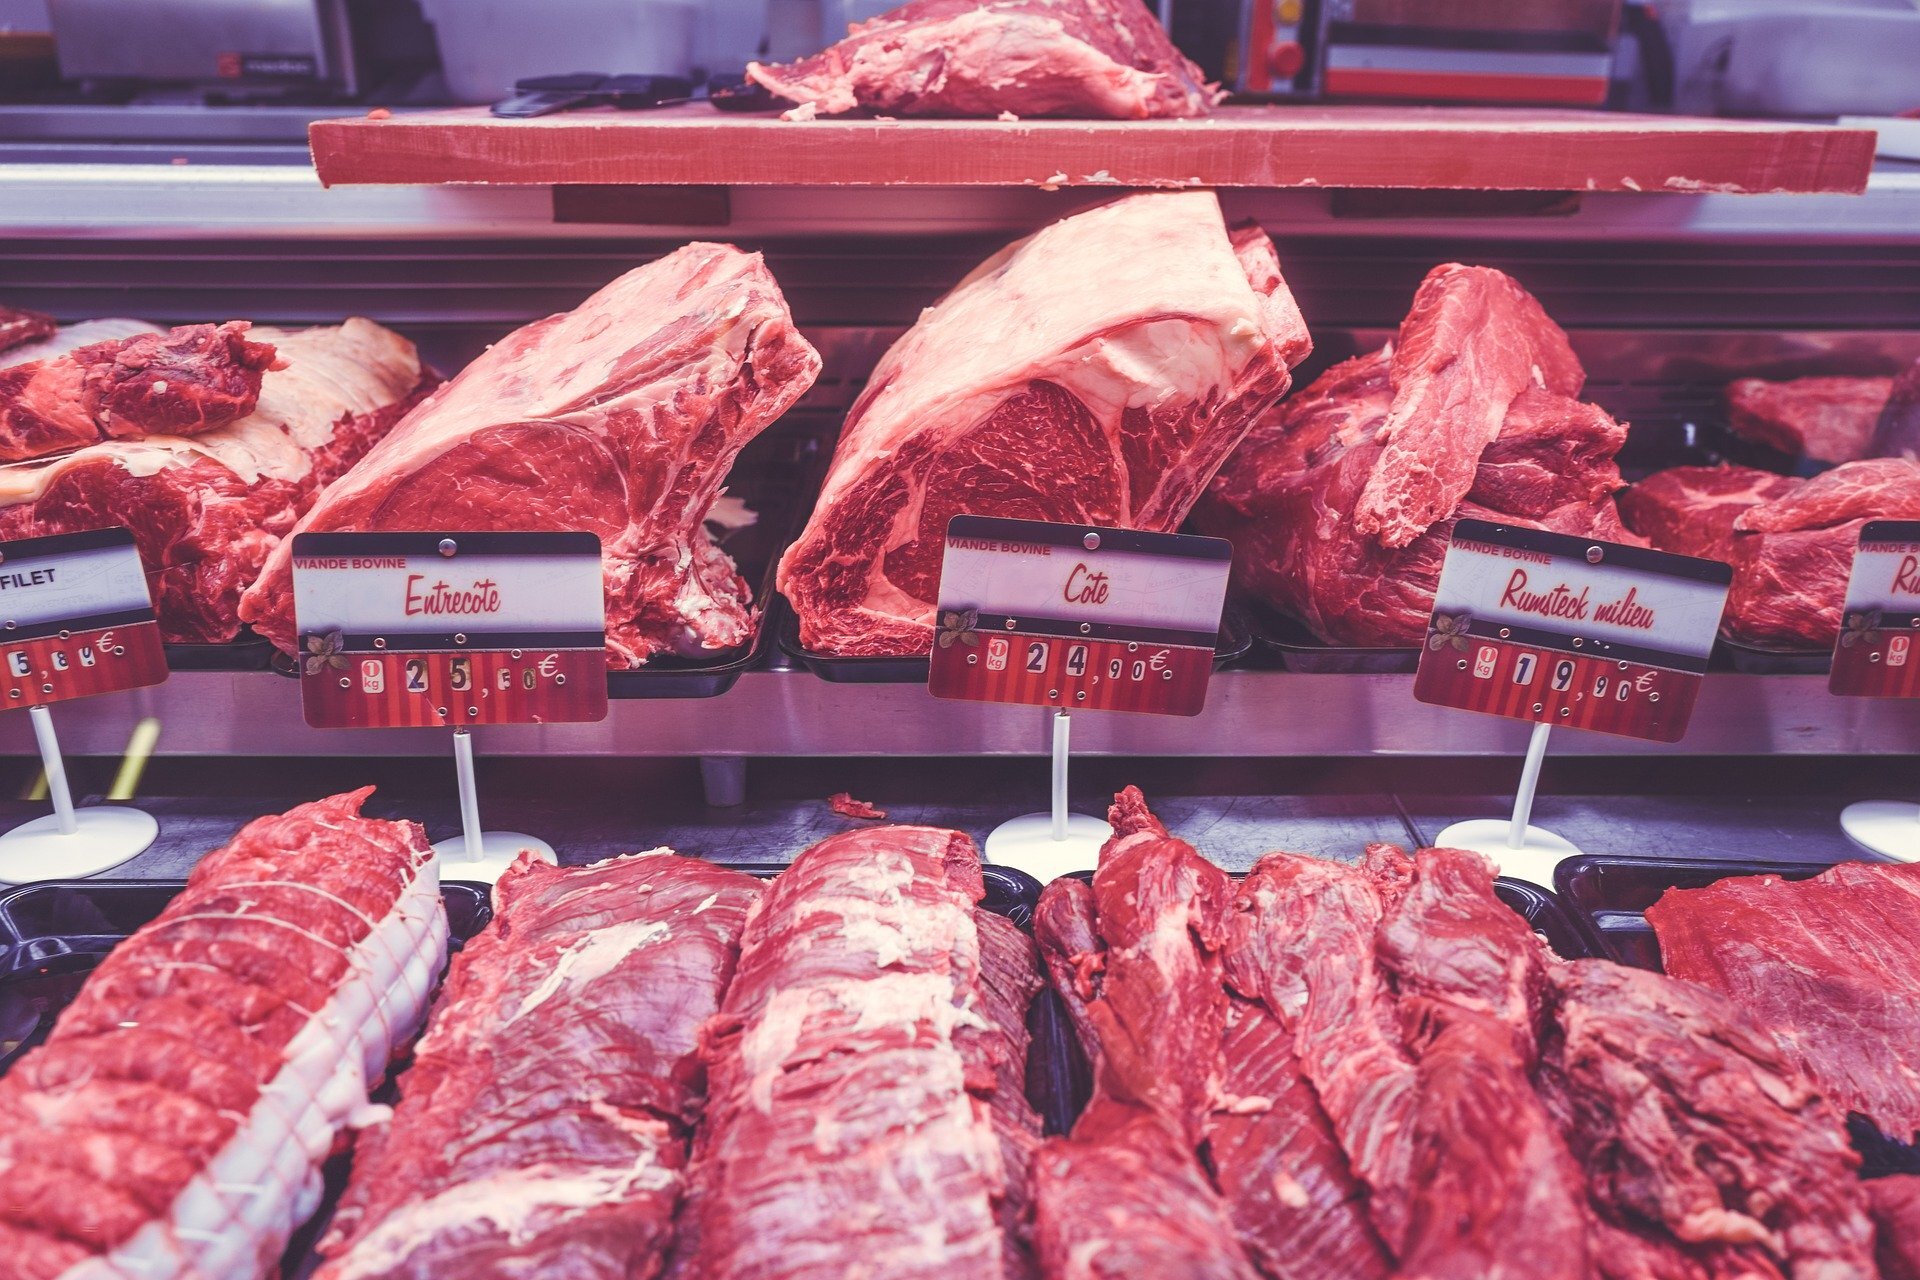 Meat industry not threatened by plant-based alternatives, study